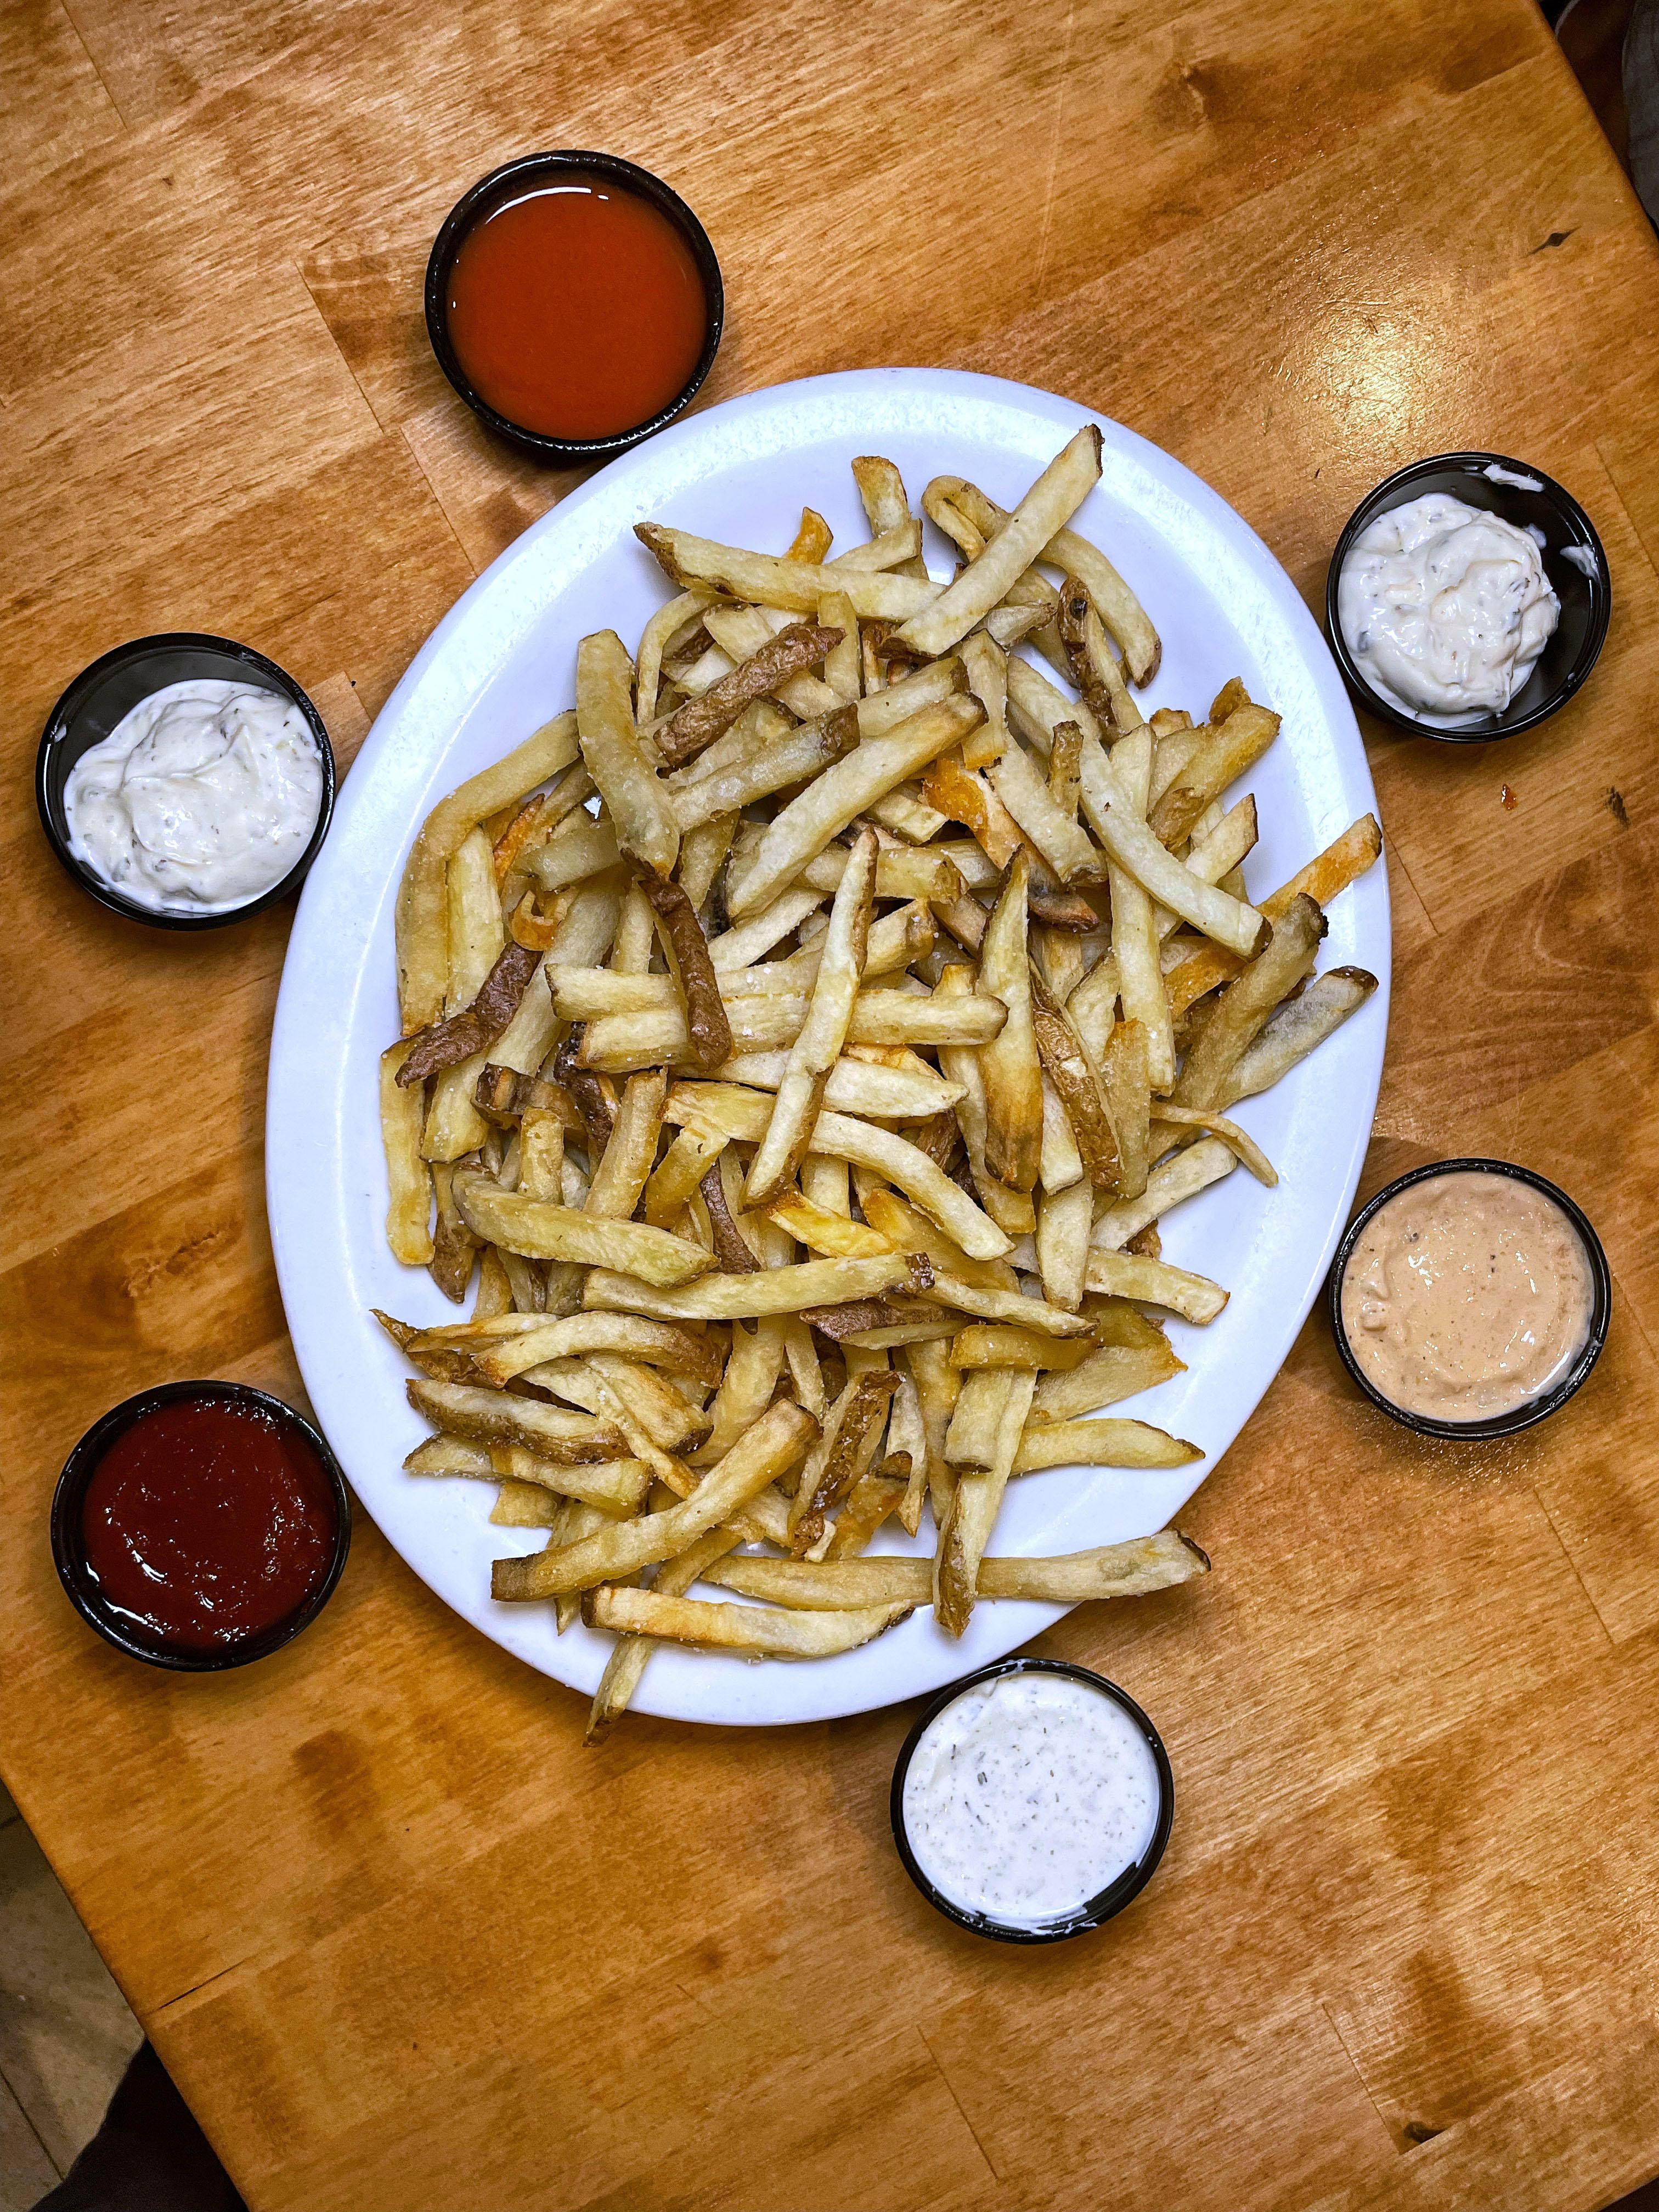 Handcut Fries and Sauces